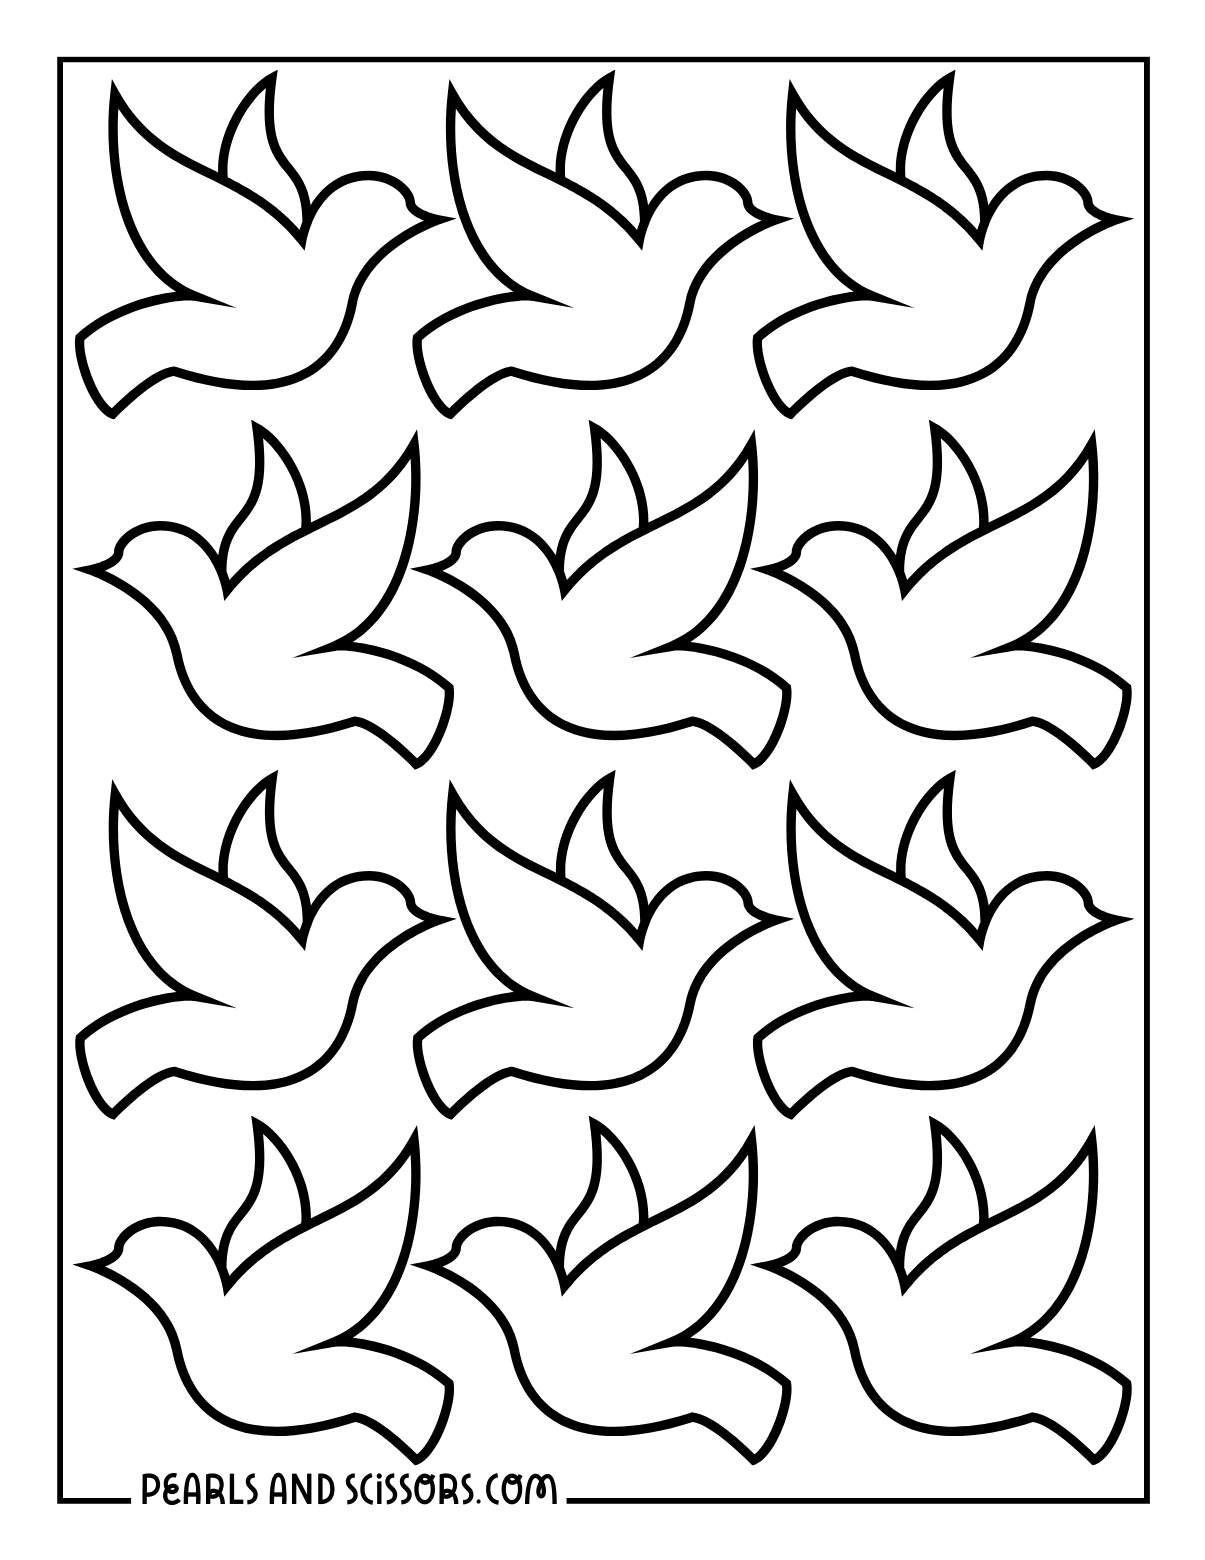 Winter doves outlines to color for kids.